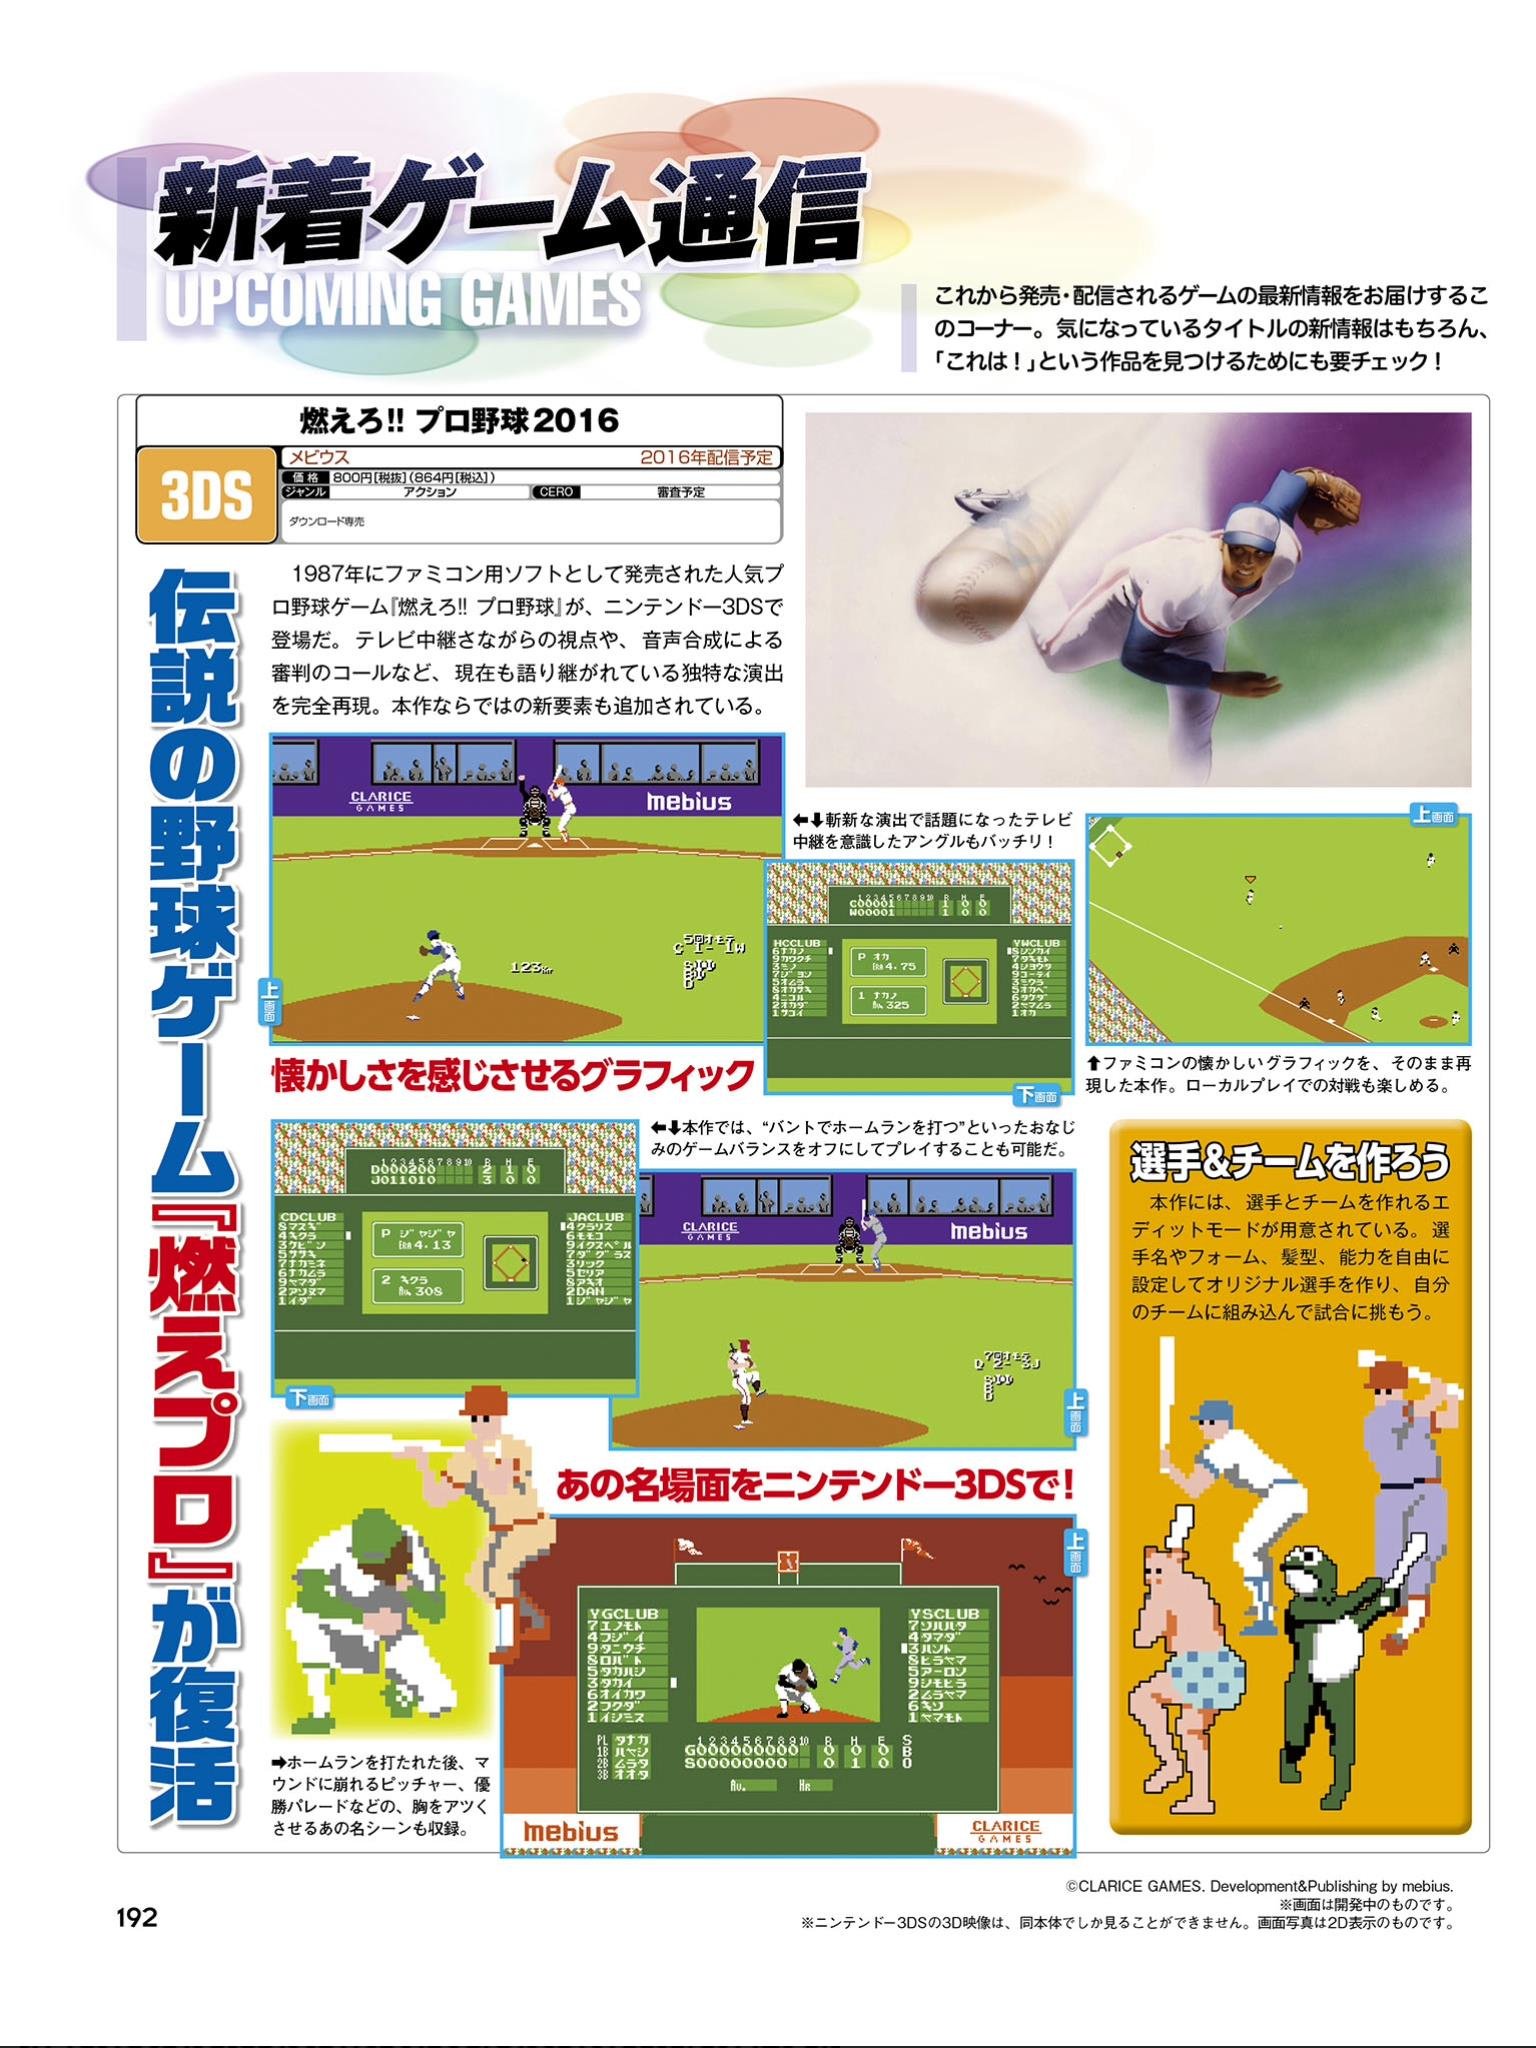 Bases Loaded Is Being Resurrected On Nintendo 3DS Nintendo Life